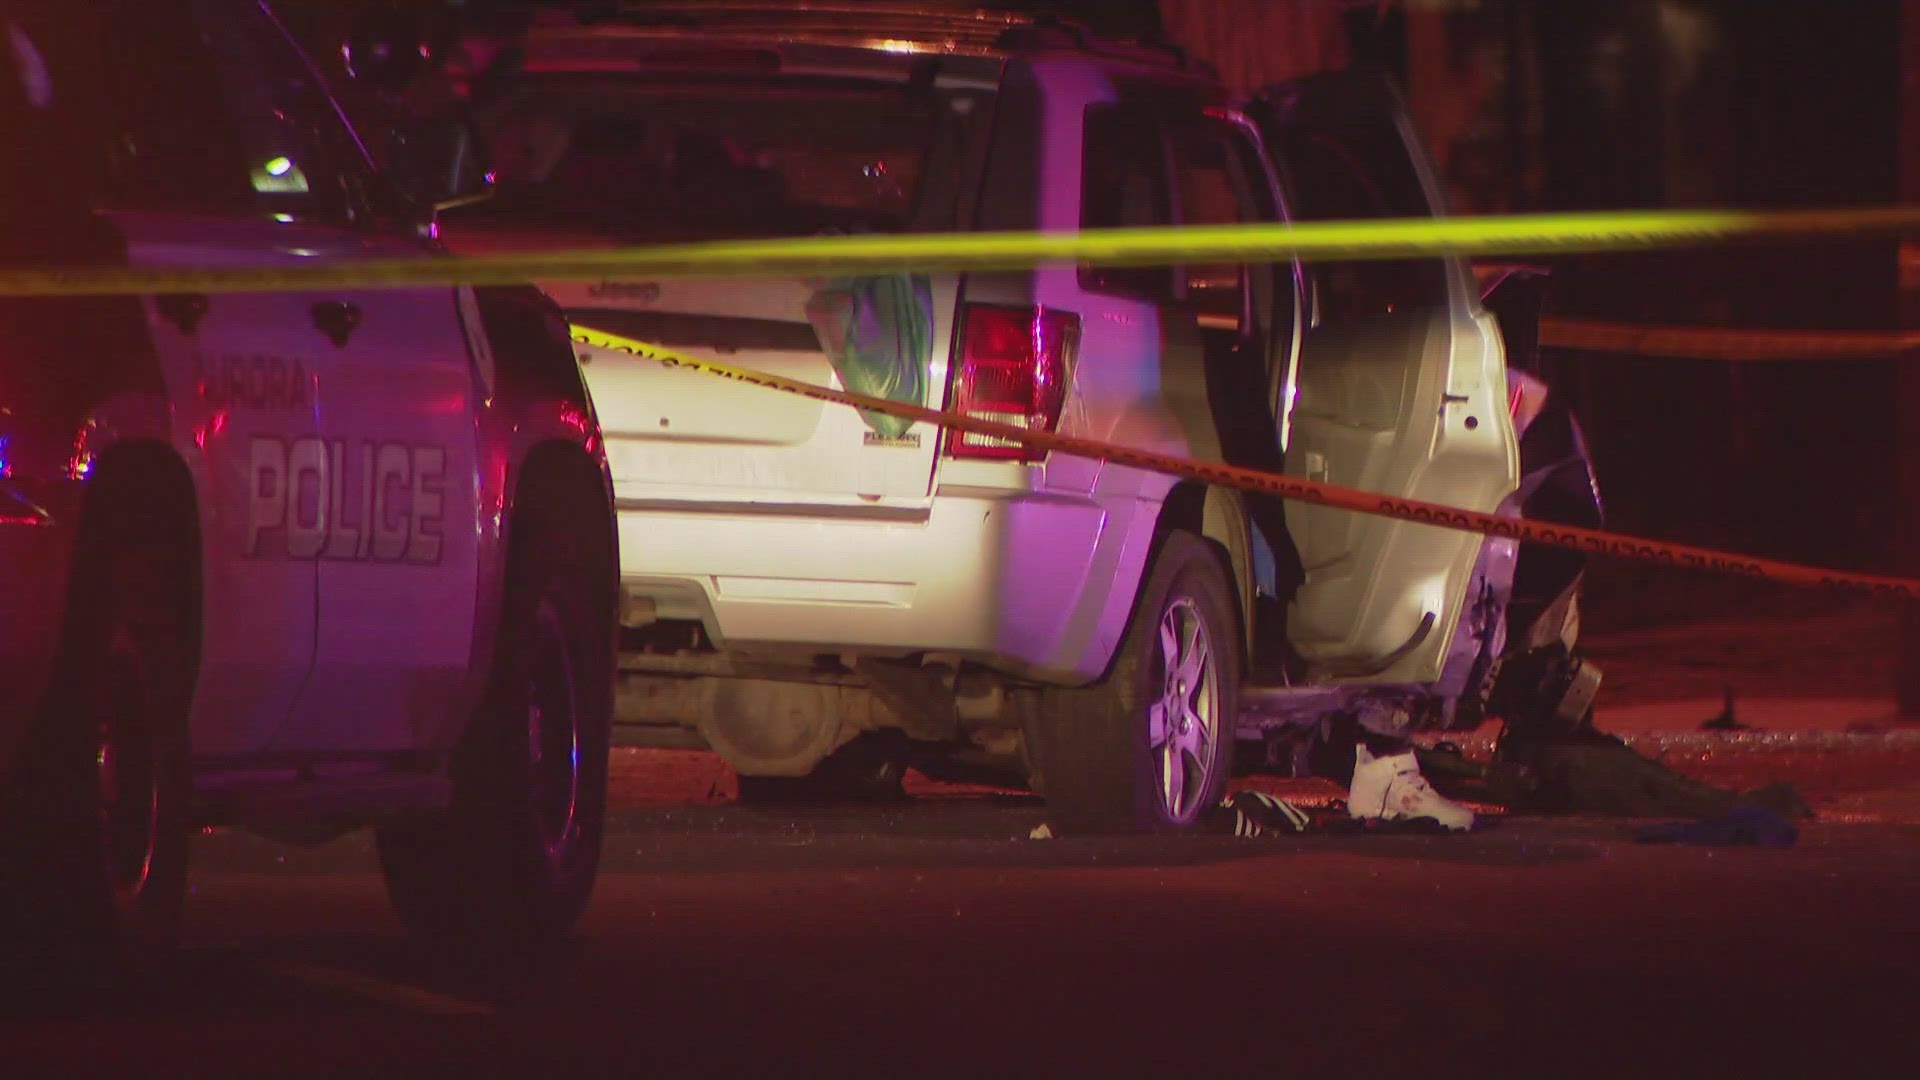 A 17-year-old boy is charged with second-degree murder after the chase and crash on March 17 on South Dayton Street in Aurora. Oliver Jose Zeledon Gongora was killed